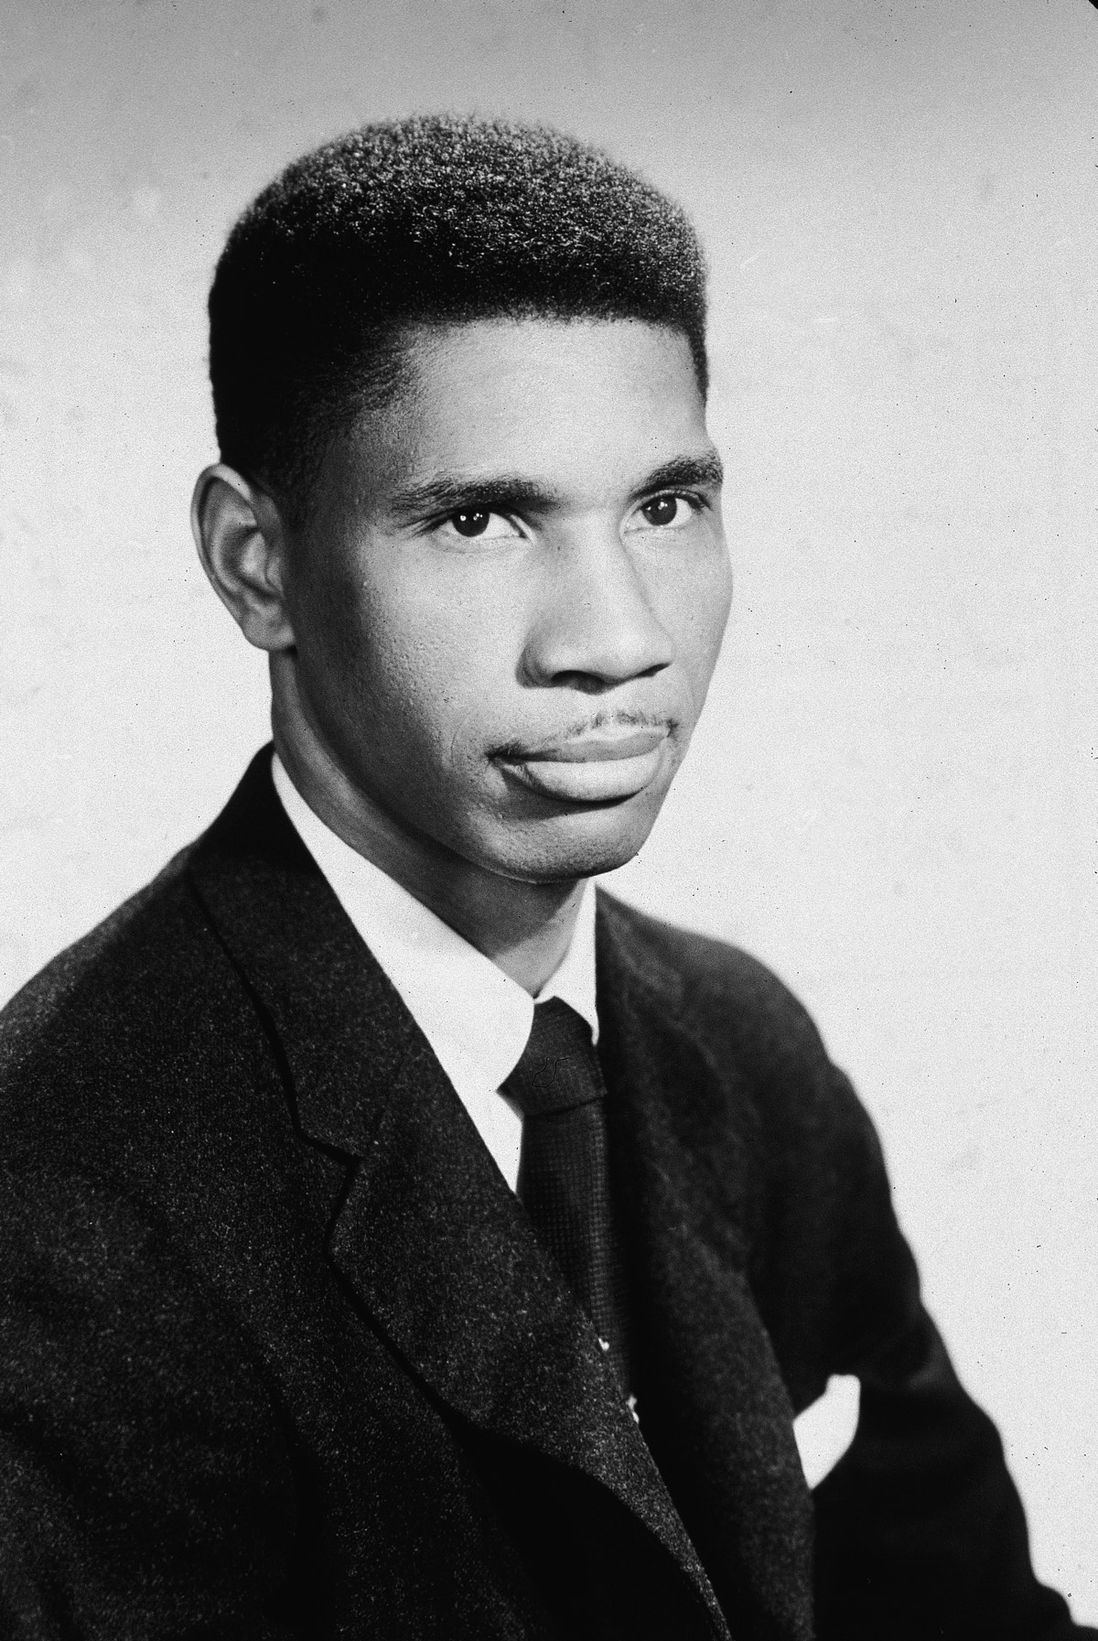 Medgar Evers, 1962. (<a href="http://www.gettyimages.com/license/2996439">Hulton Archive</a>/Getty Images)